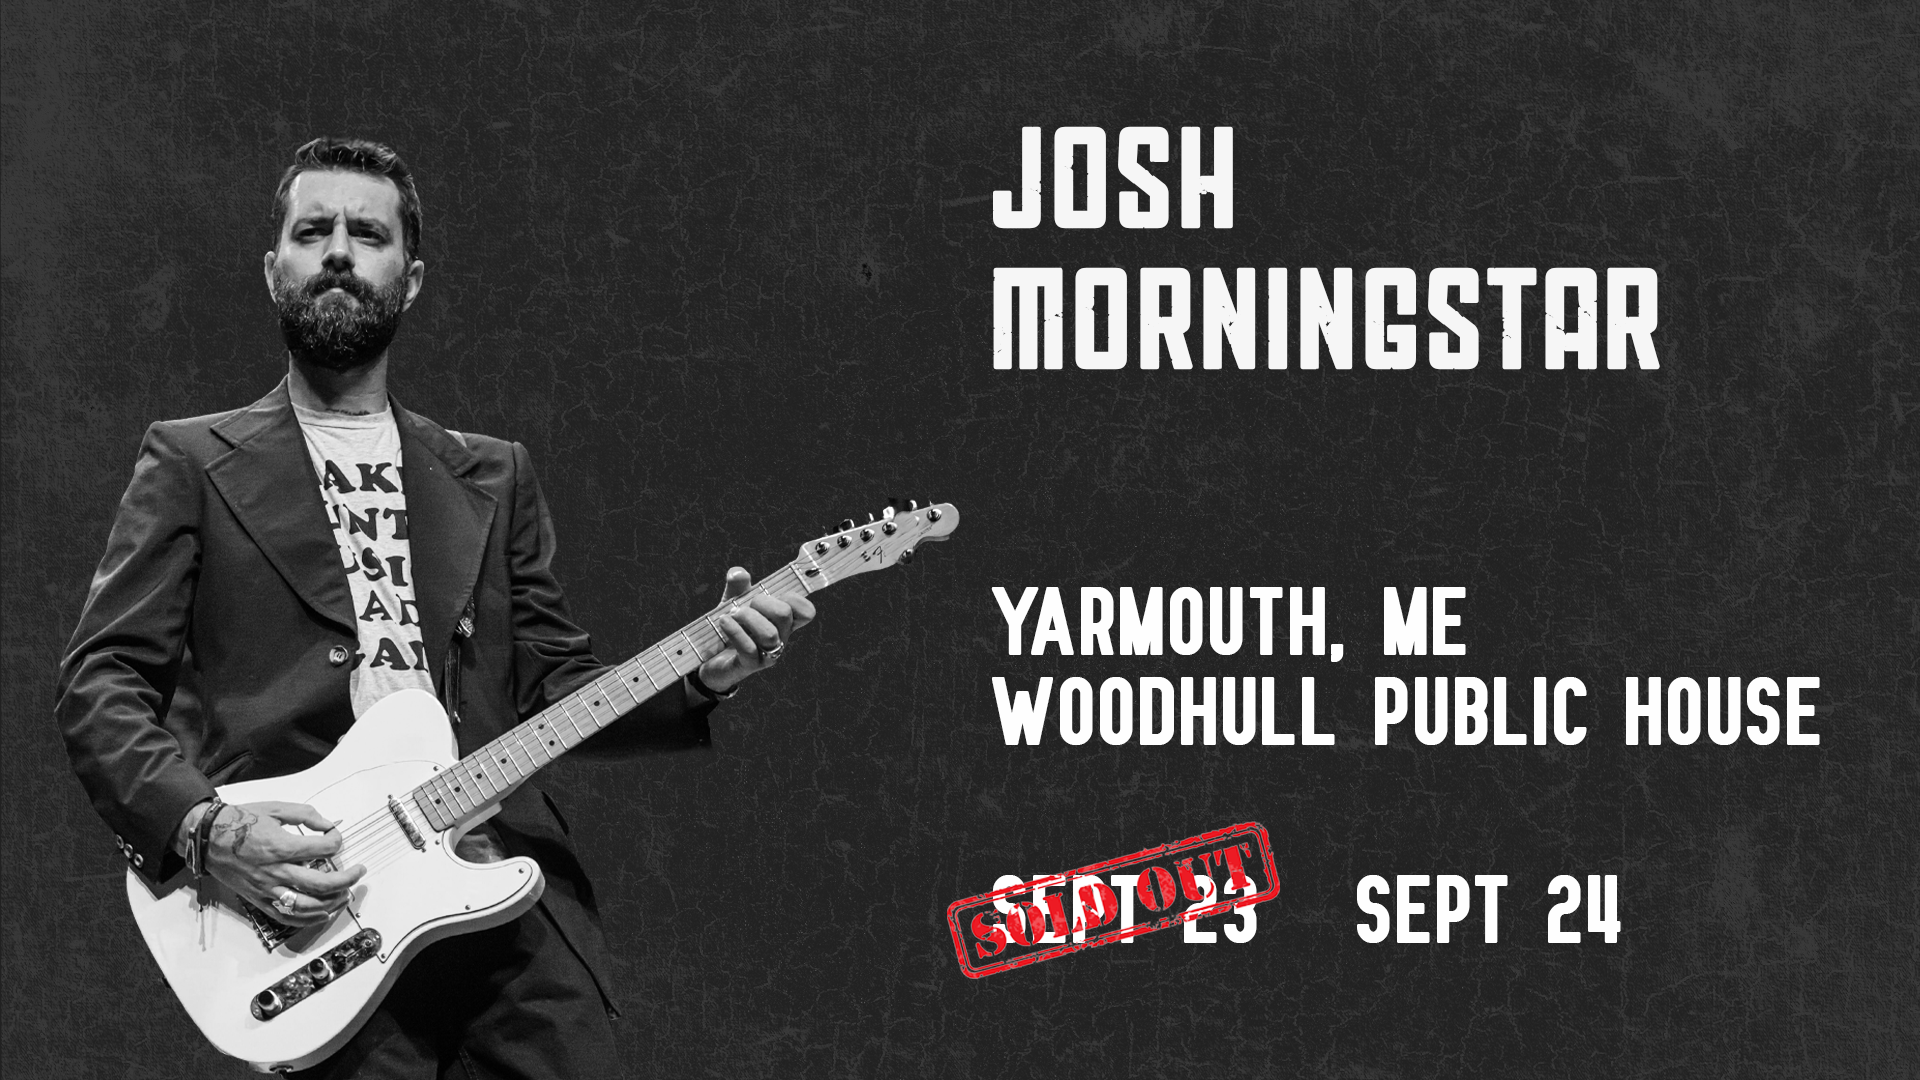 Songs & Stories with Josh Morningstar - RESCHEDULED